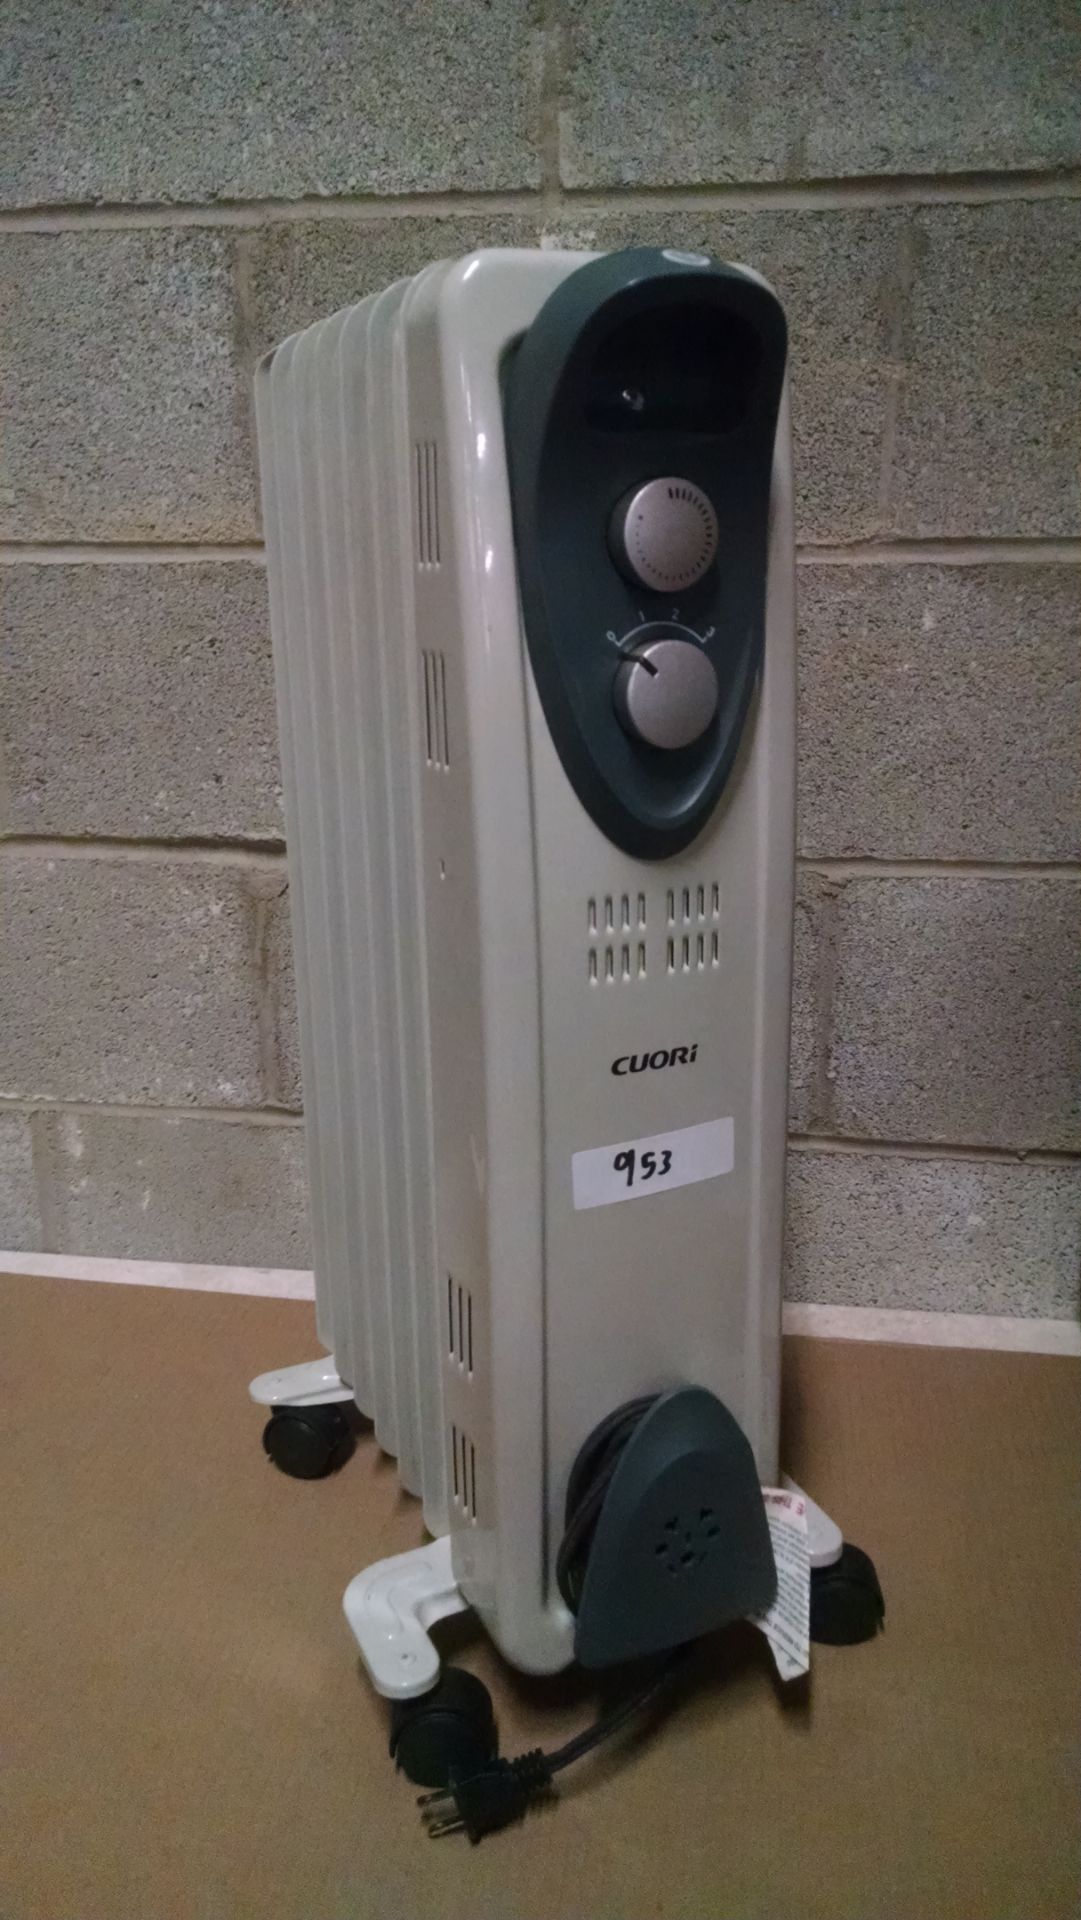 CUORI LARGE ROOM ELECTRIC RADIATOR HEATER. Retail Price in Major Home Improvement Store: $70 NA